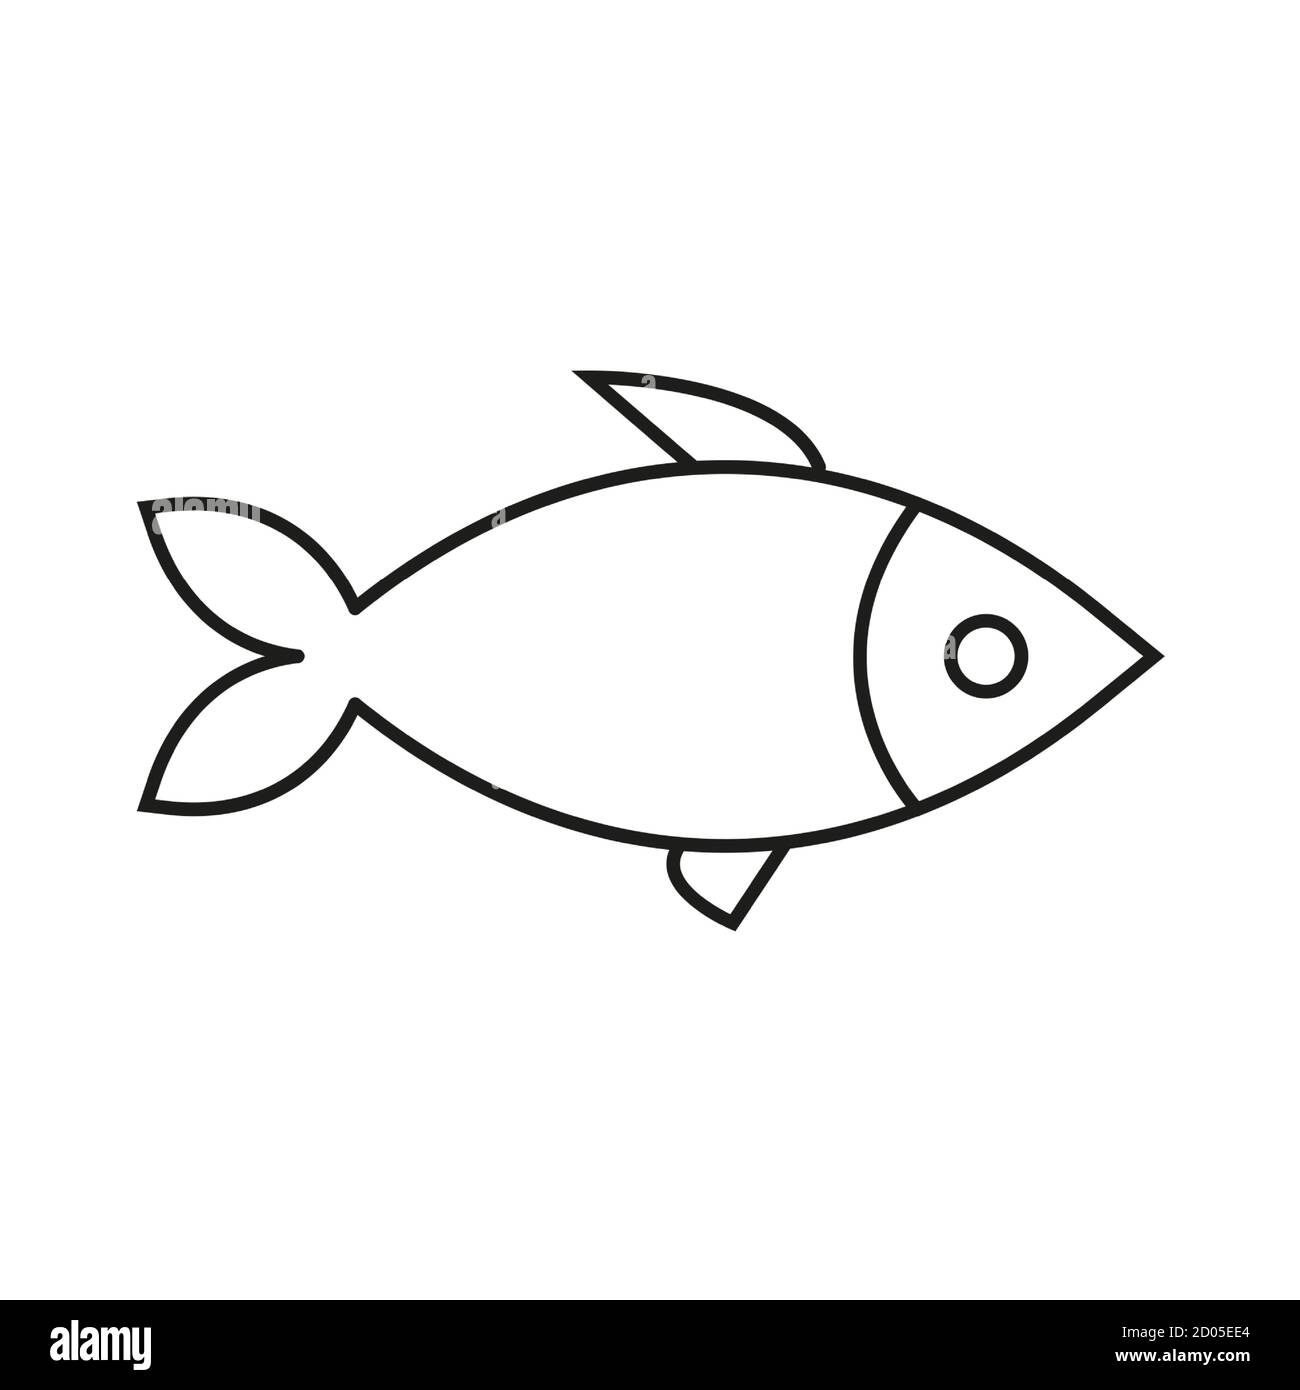 Simple Vector Drawing Small Fish Stock Vector Royalty Free 1728996523   Shutterstock